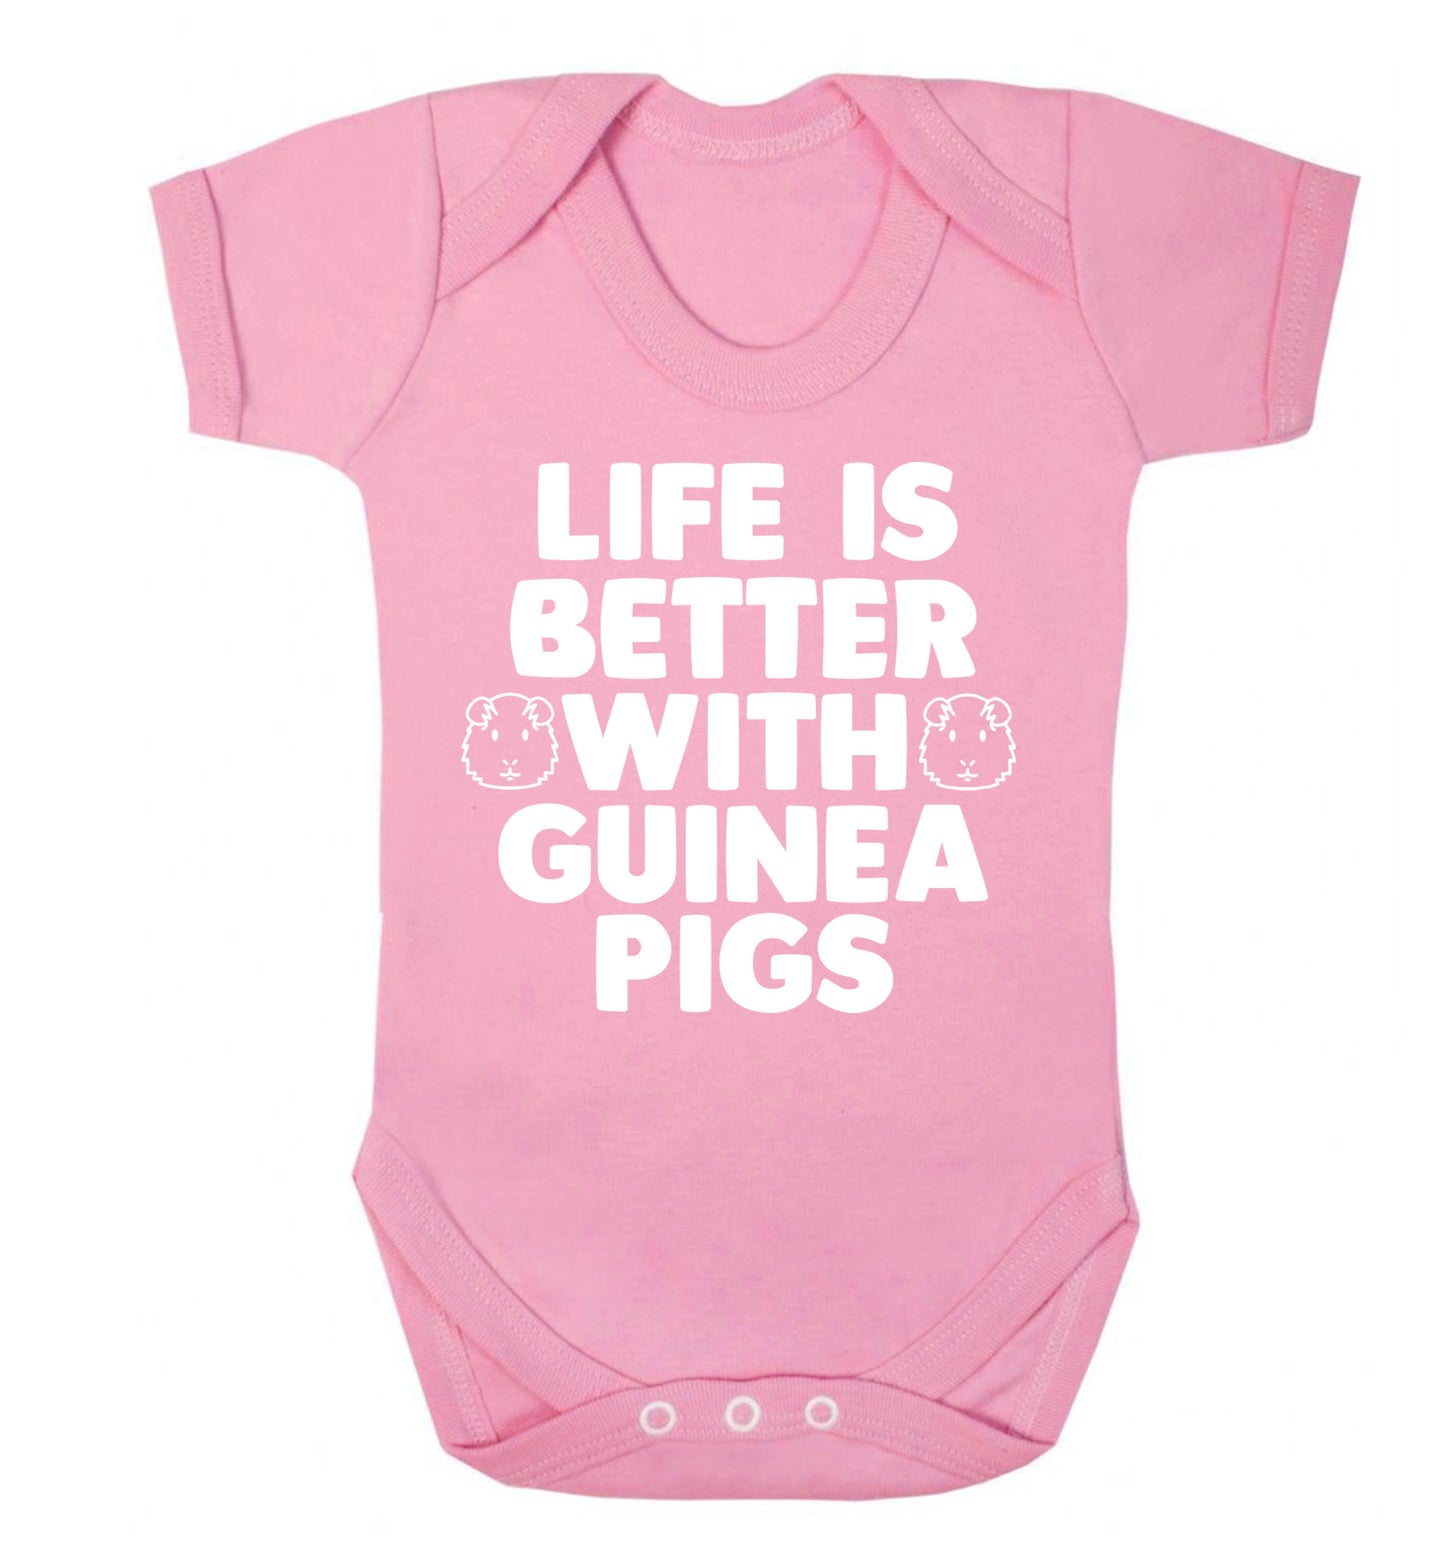 Life is better with guinea pigs Baby Vest pale pink 18-24 months